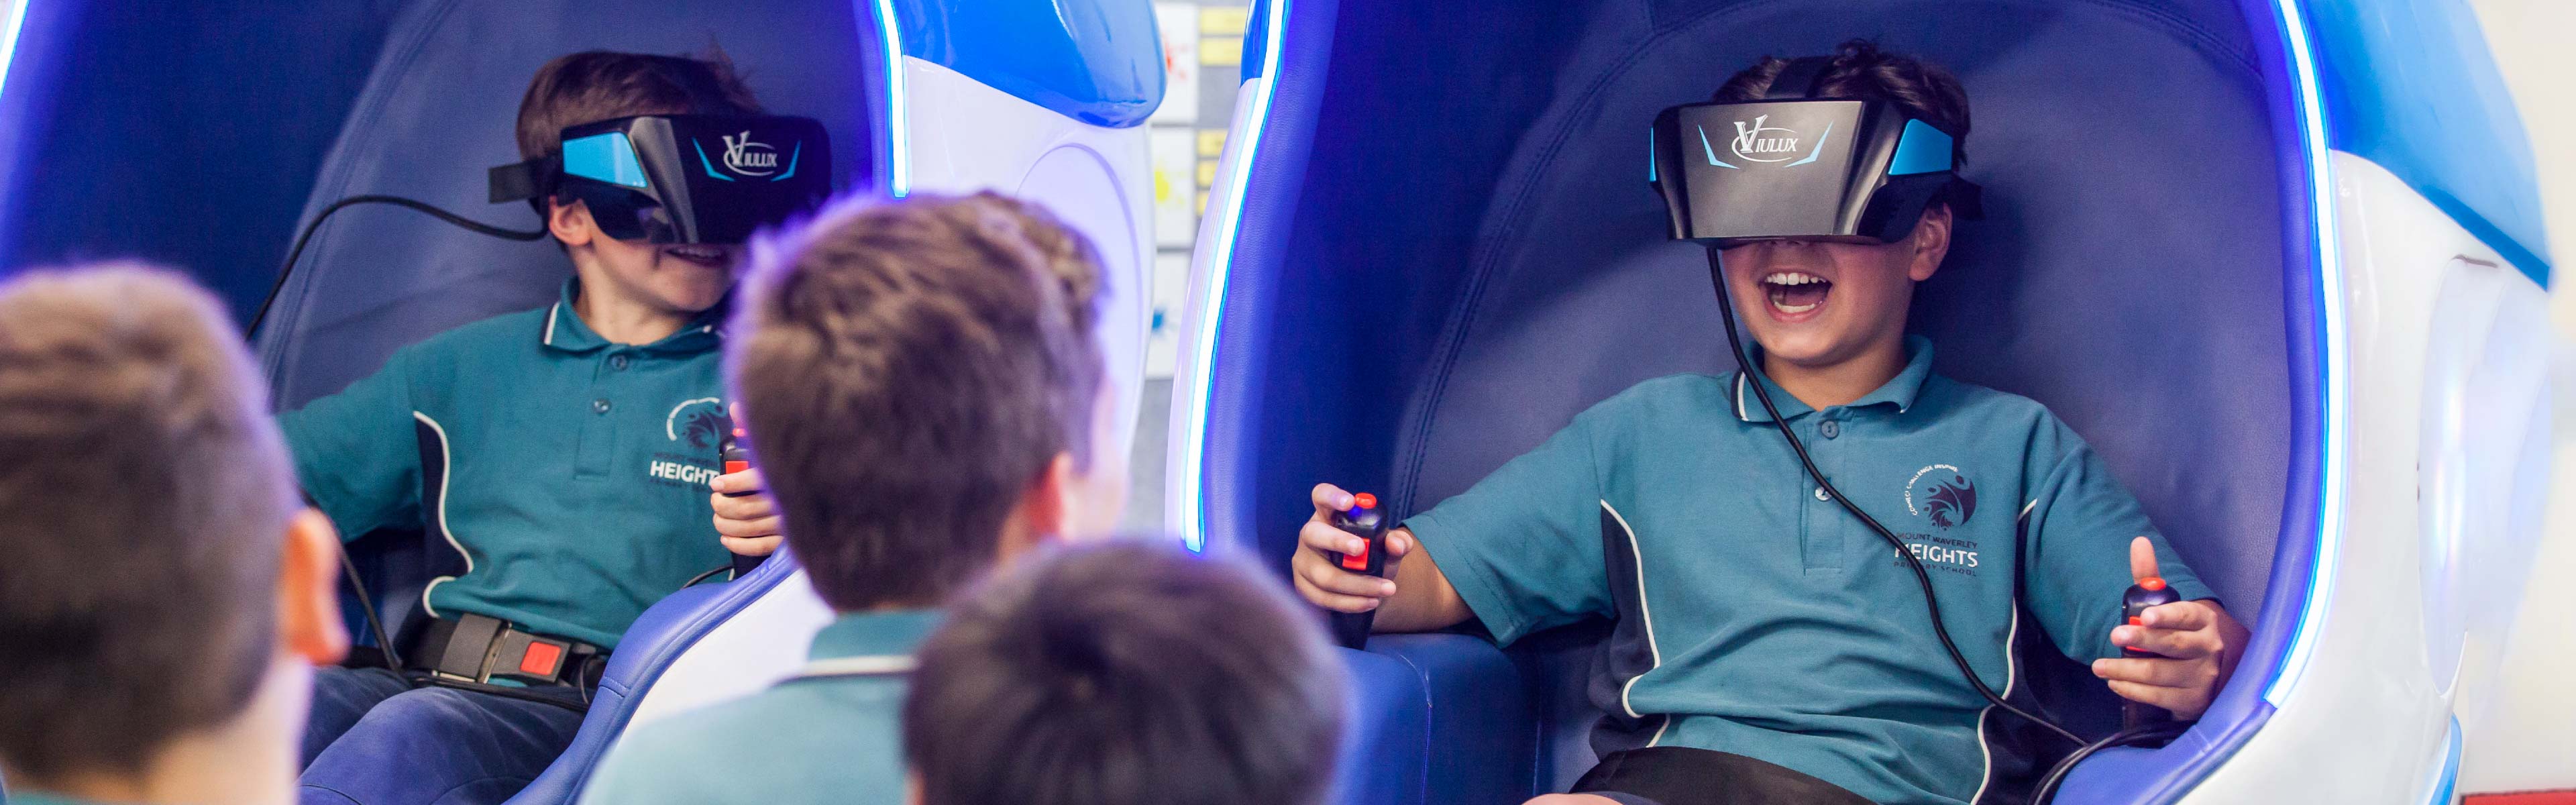 Smiling young student sitting in a VR booth wearing a VR headset